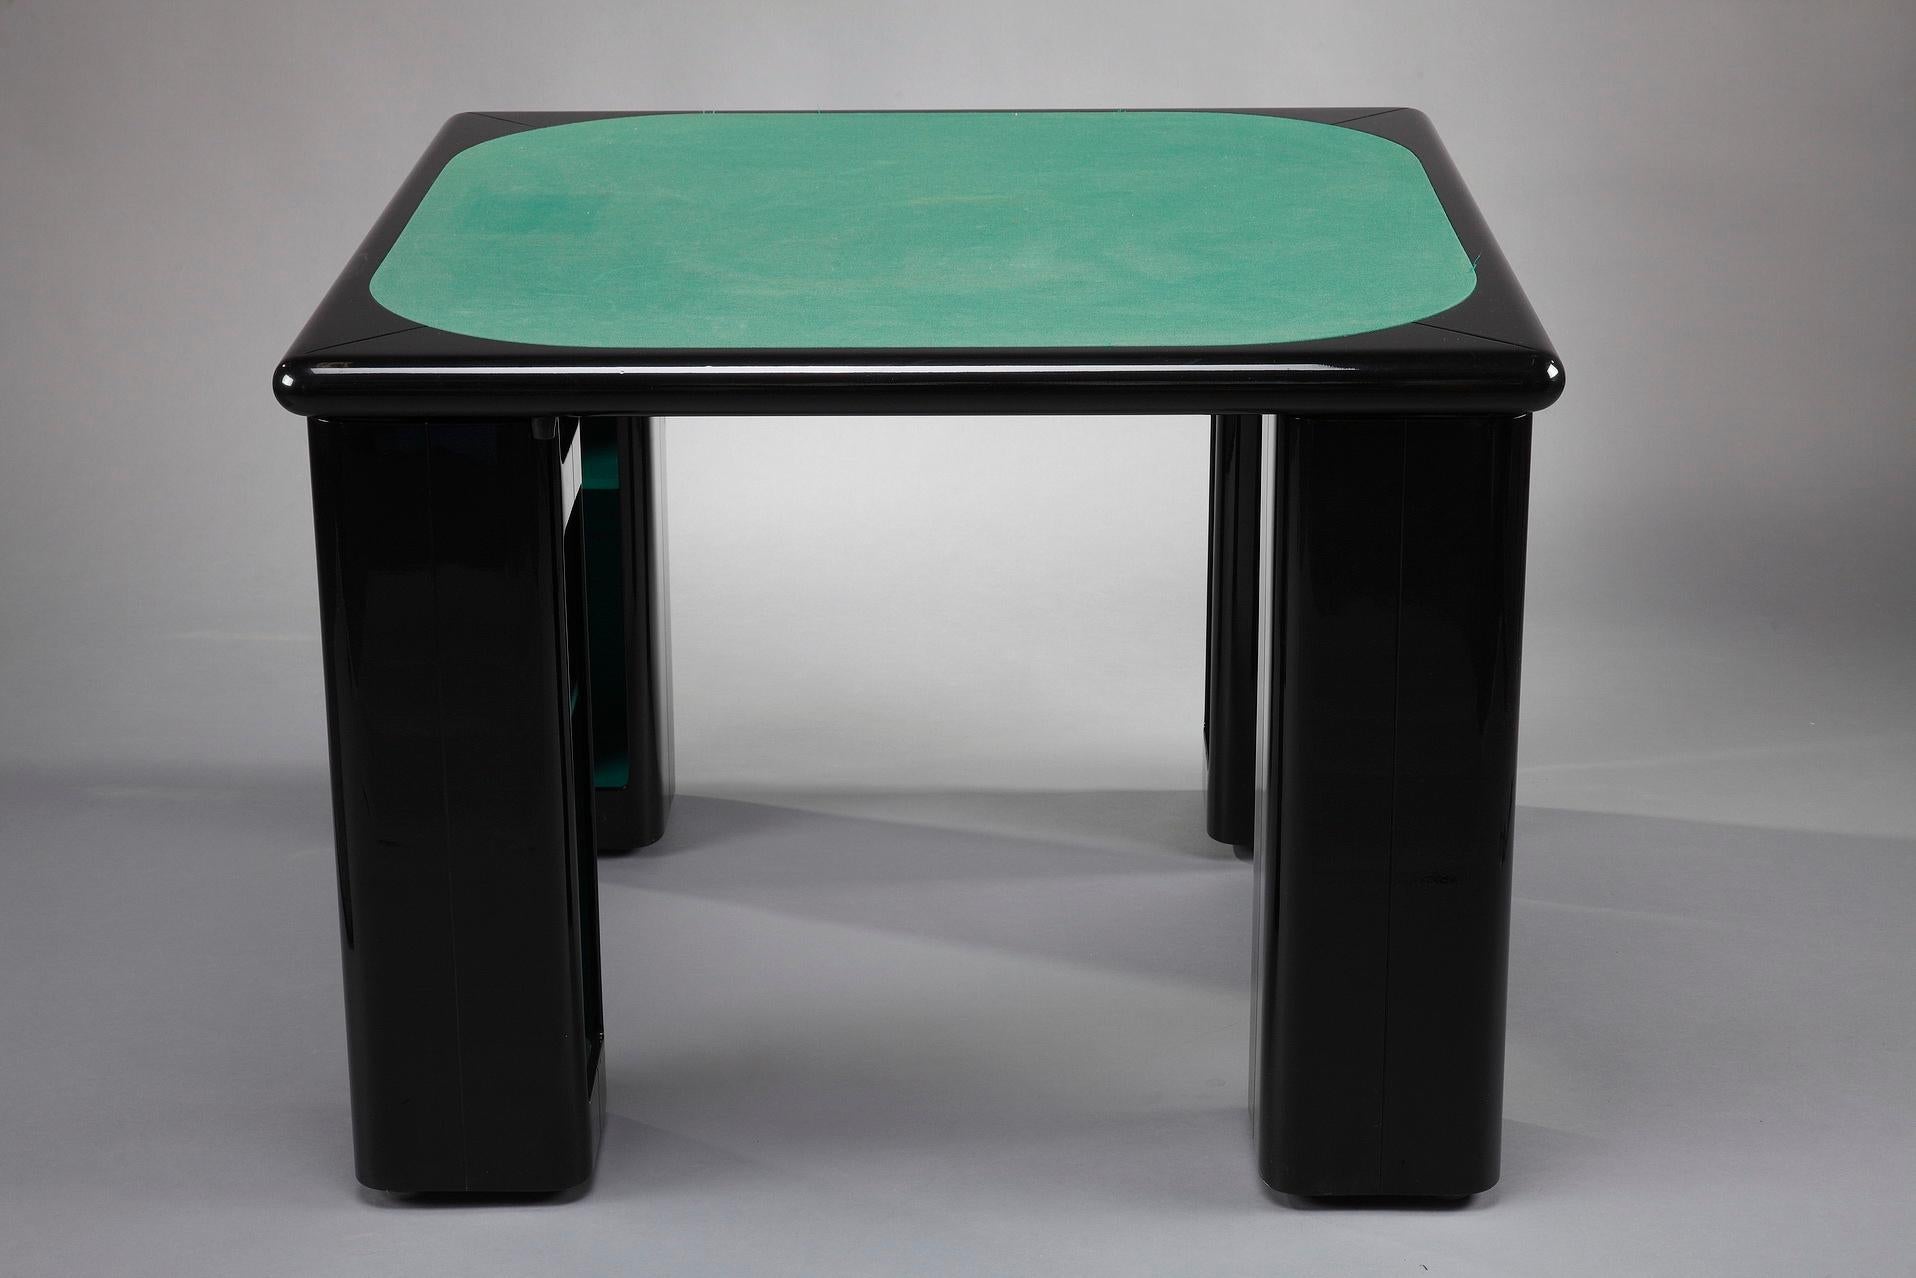 Italian game table for bridge, cards and poker by Pierluigi Molinari (Milan, 1938) for Pozzi Milano. Structure in lacquered ebony wood. The four cubic legs can rotate around a chrome tube to reveal storage compartments for games, cards or bottles.